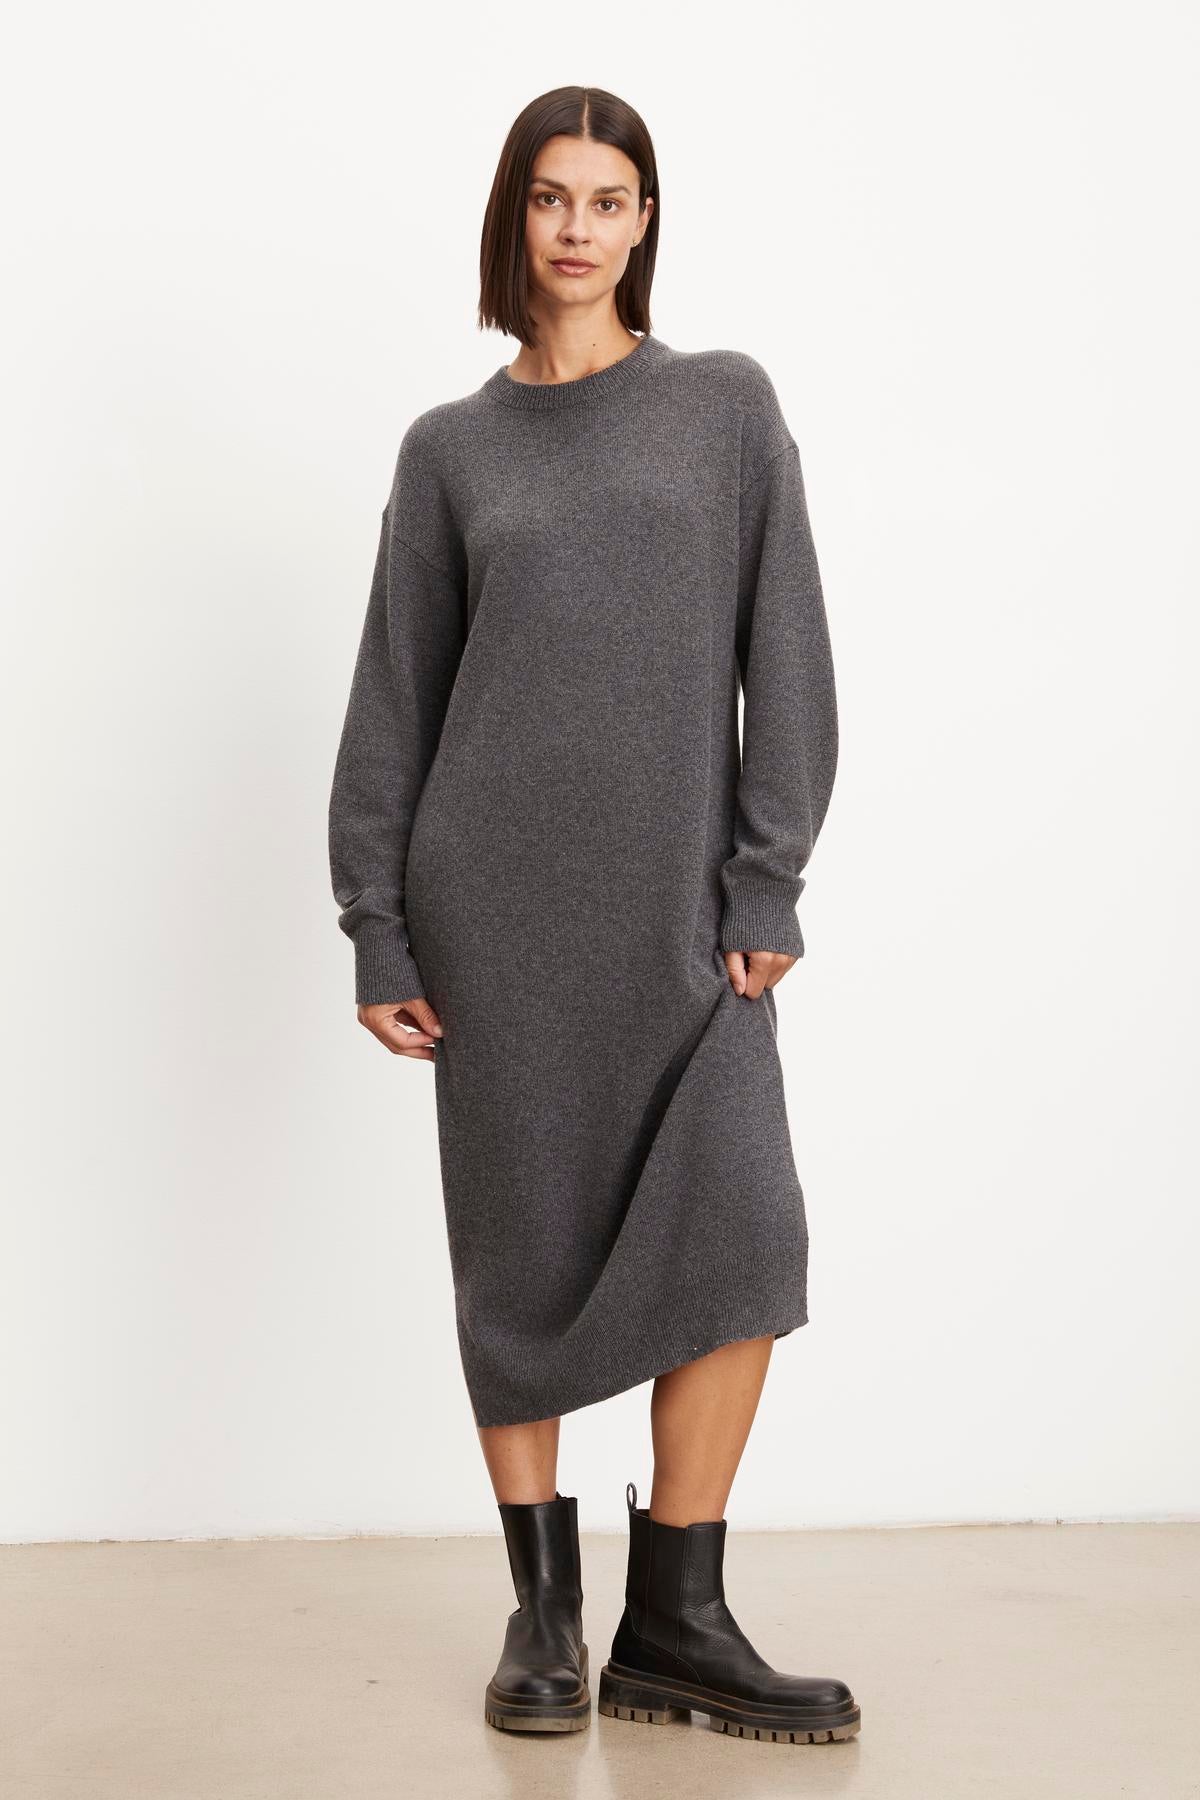   A woman standing in a minimalist setting, wearing a long, gray KADEN SWEATER DRESS with a side split hem and black combat boots from Velvet by Graham & Spencer. 